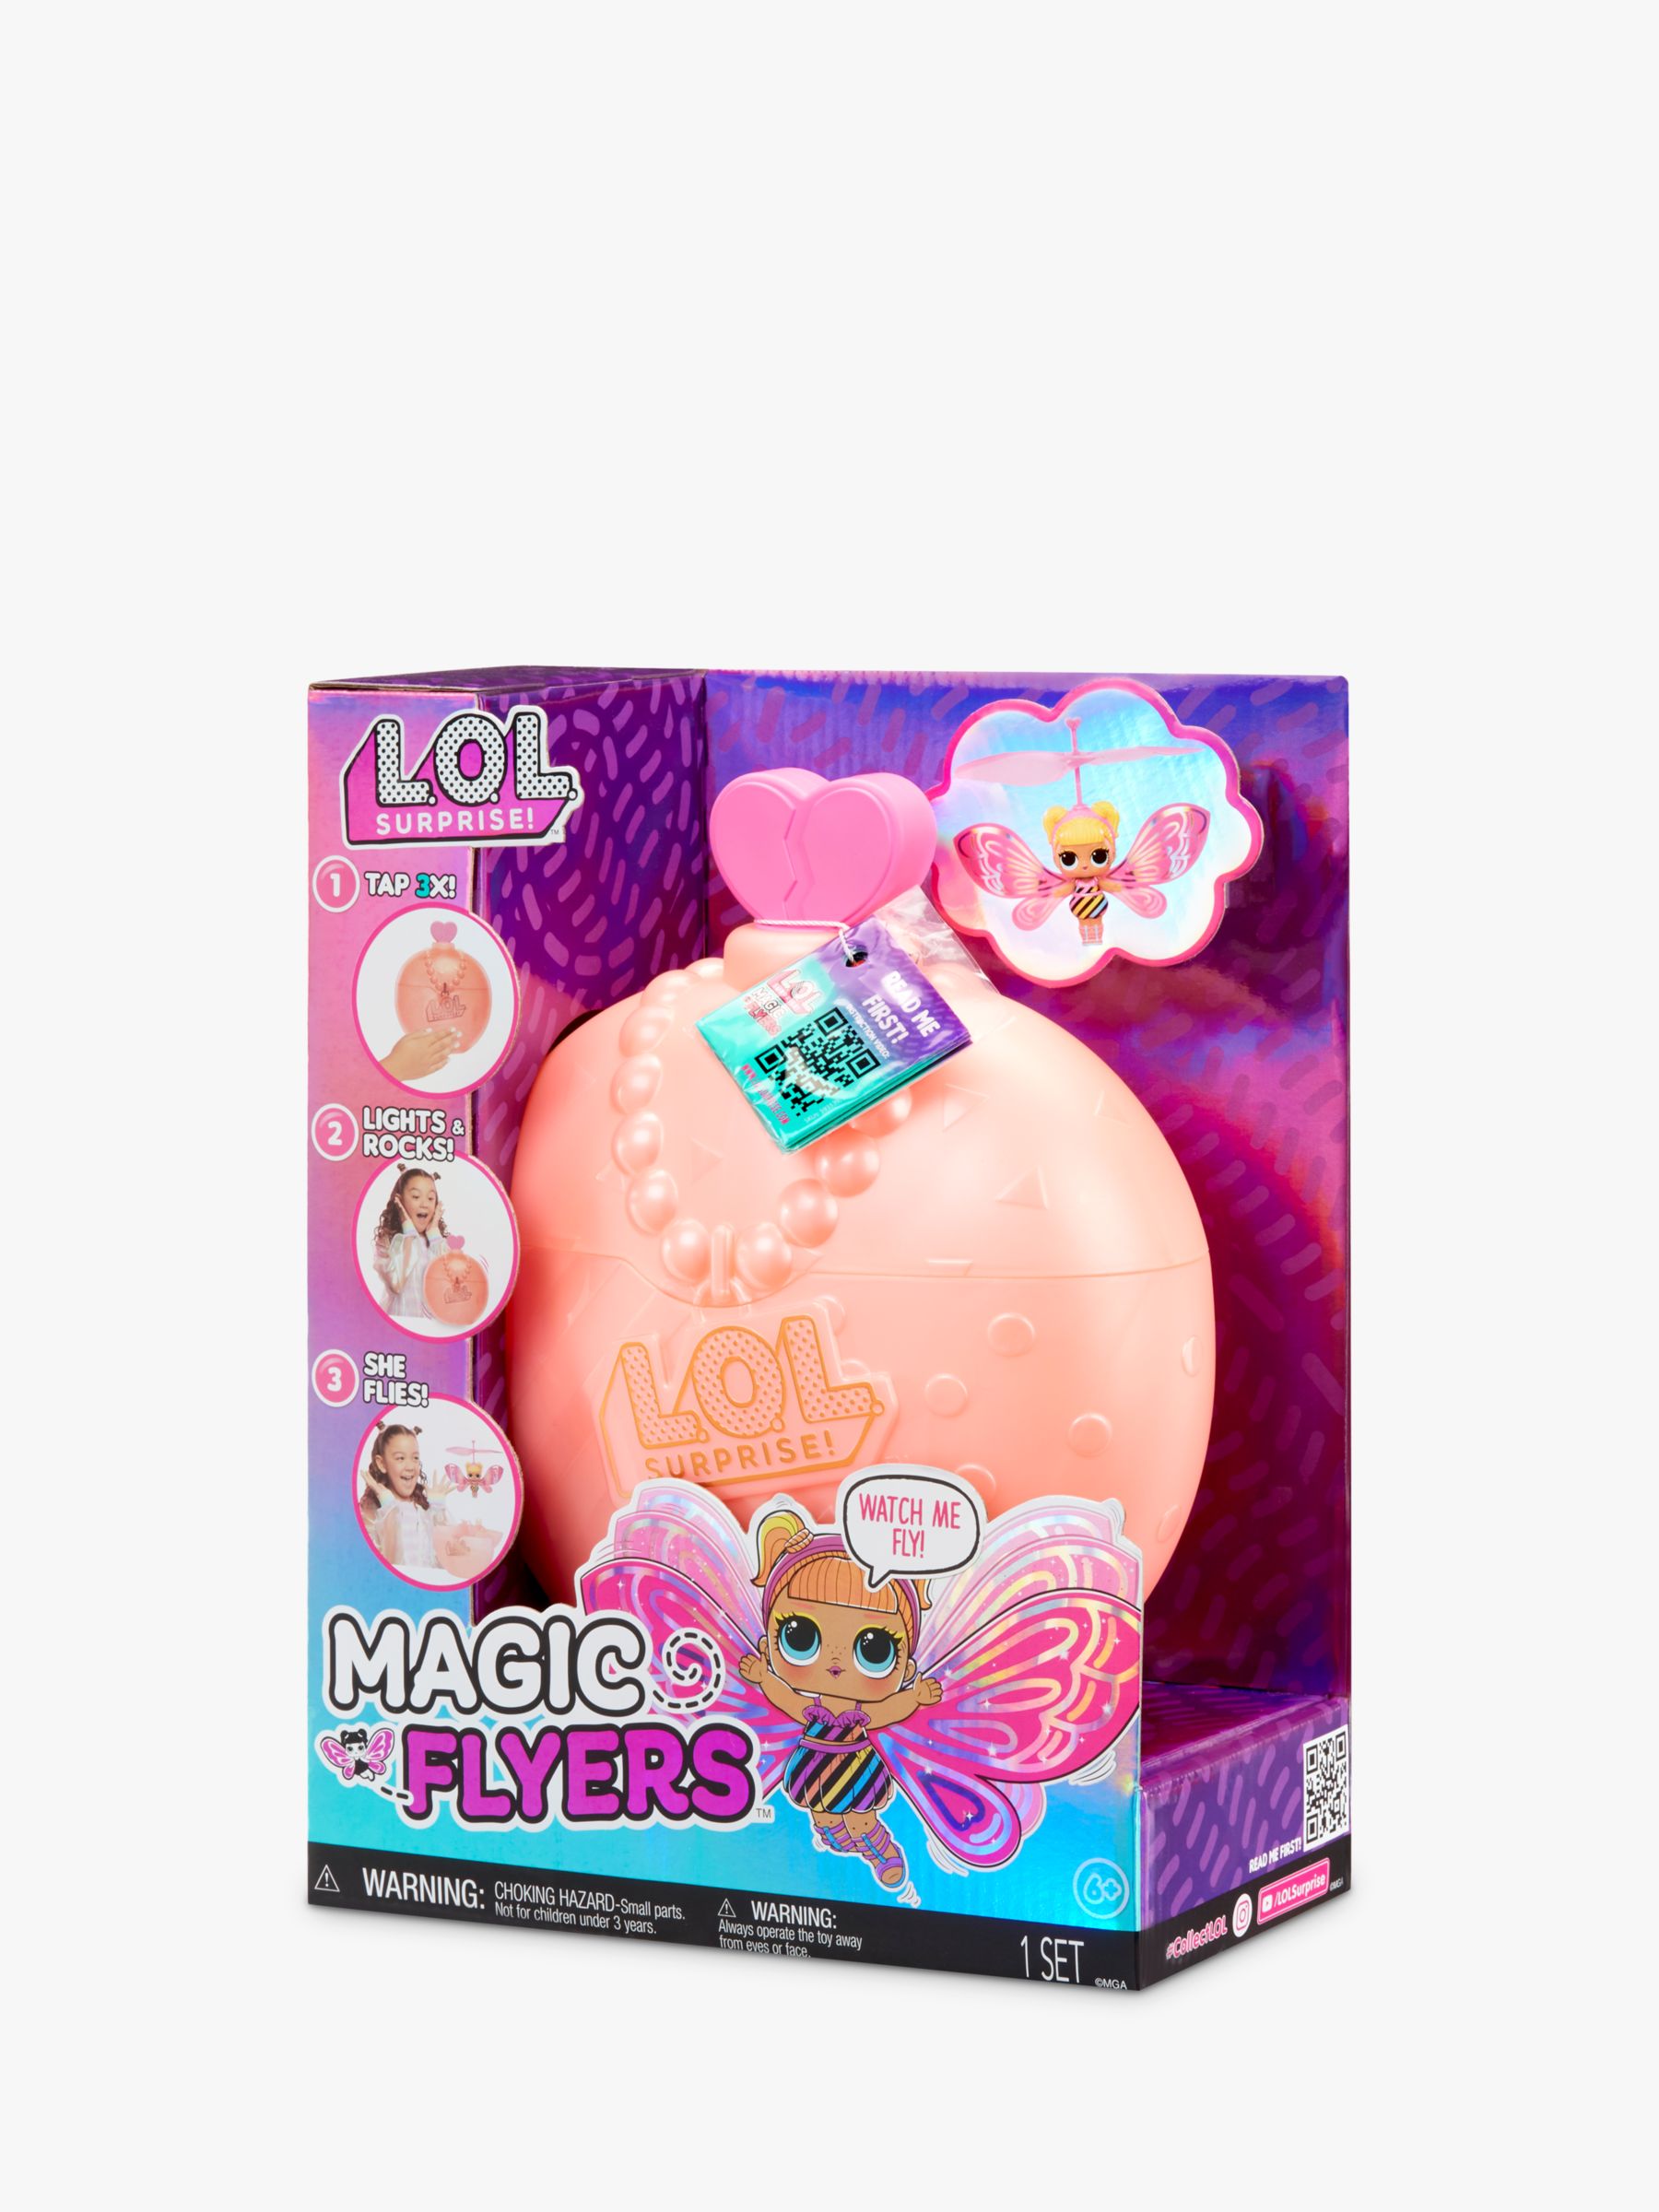 LOL Surprise UK - We are delighted to announce that our LOL Surprise Magic  Flyers have flown into the Top 20 Toys for Christmas this year! 🧚🎉 Every  year, DreamToys announce their